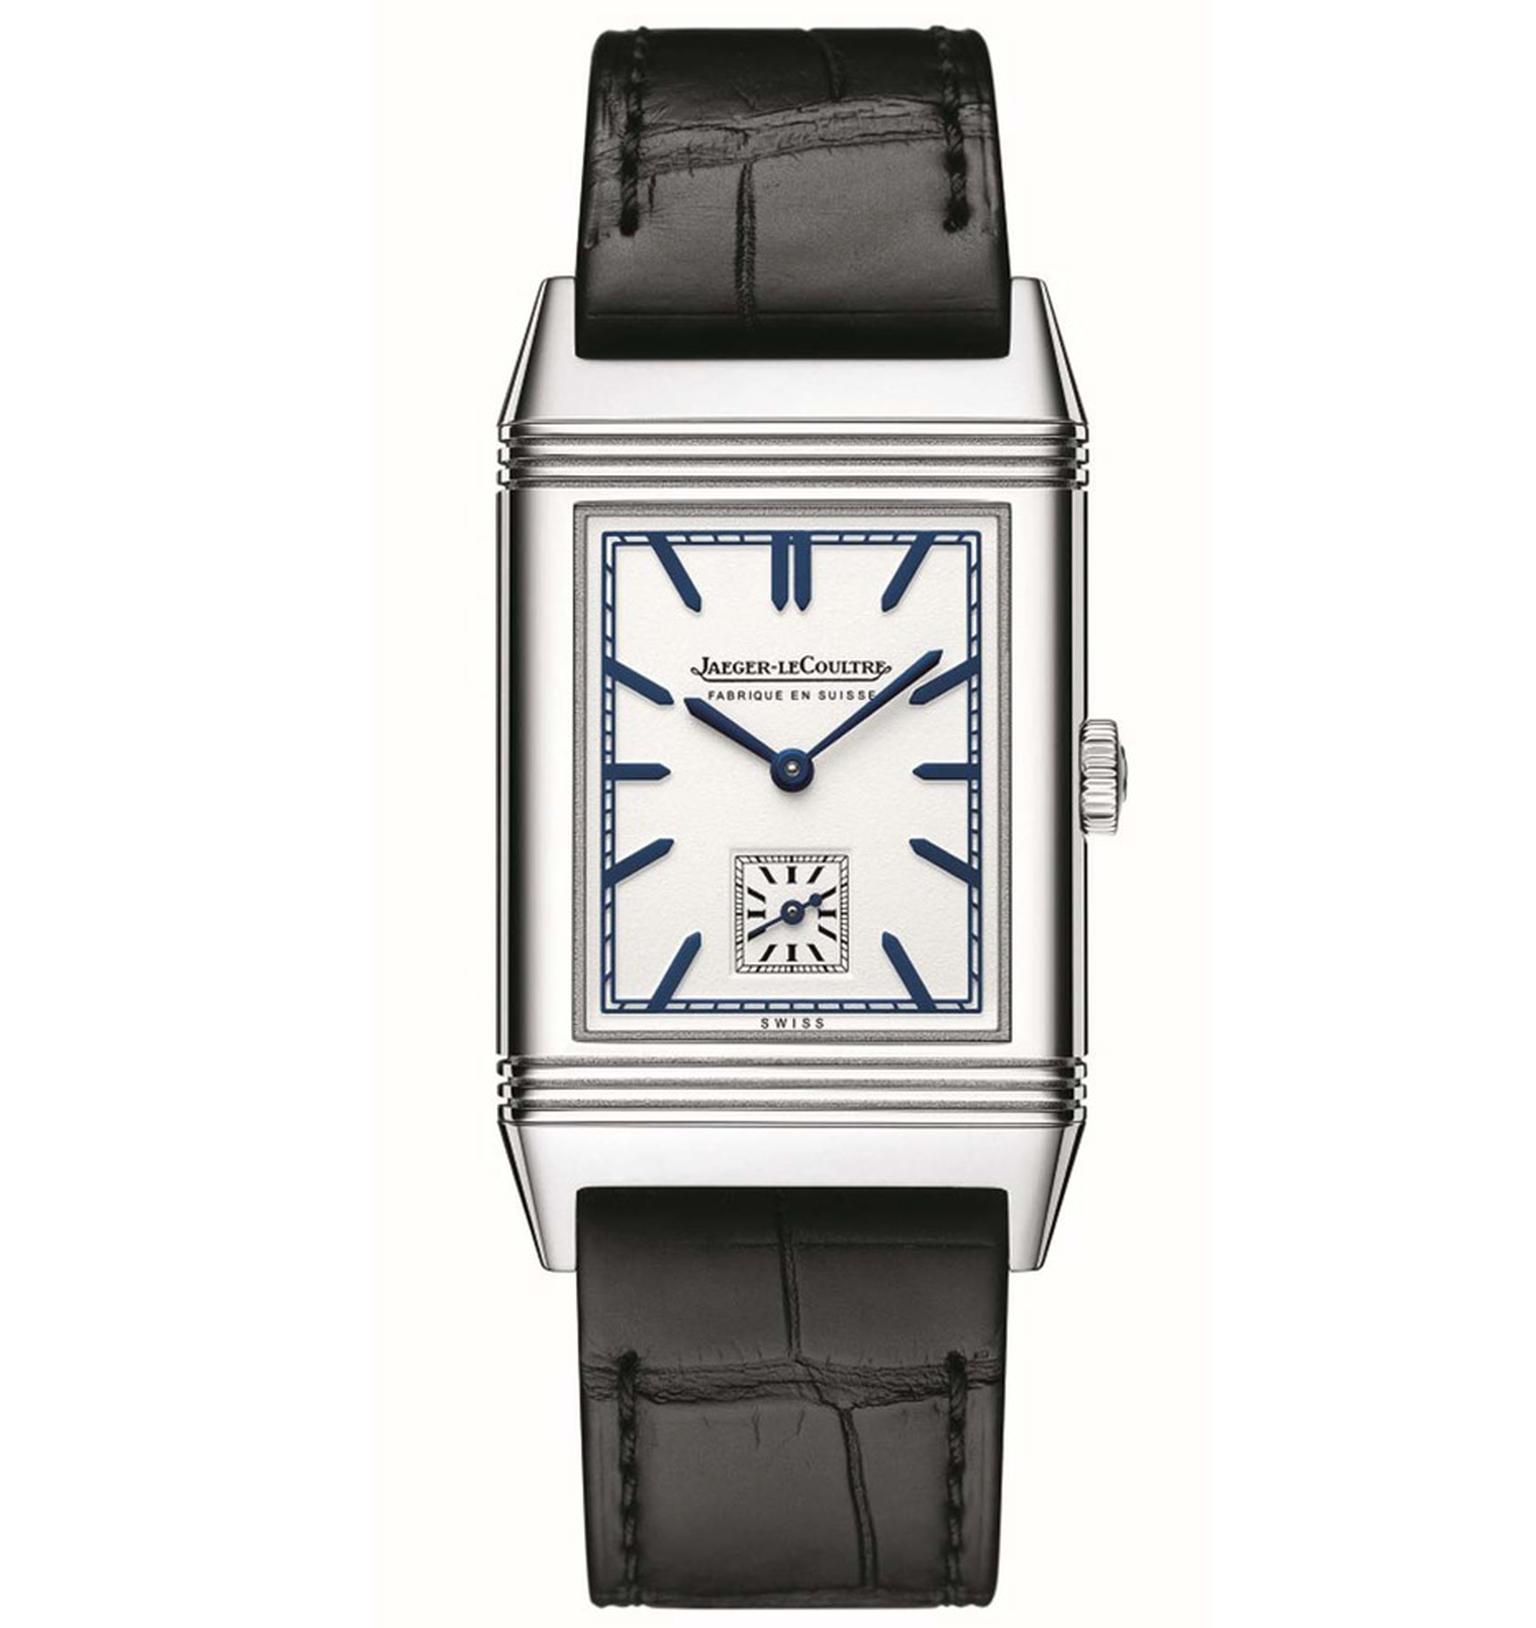 Jaeger-LeCoultre Grande Reverso Ultra-Thin 1948 watch